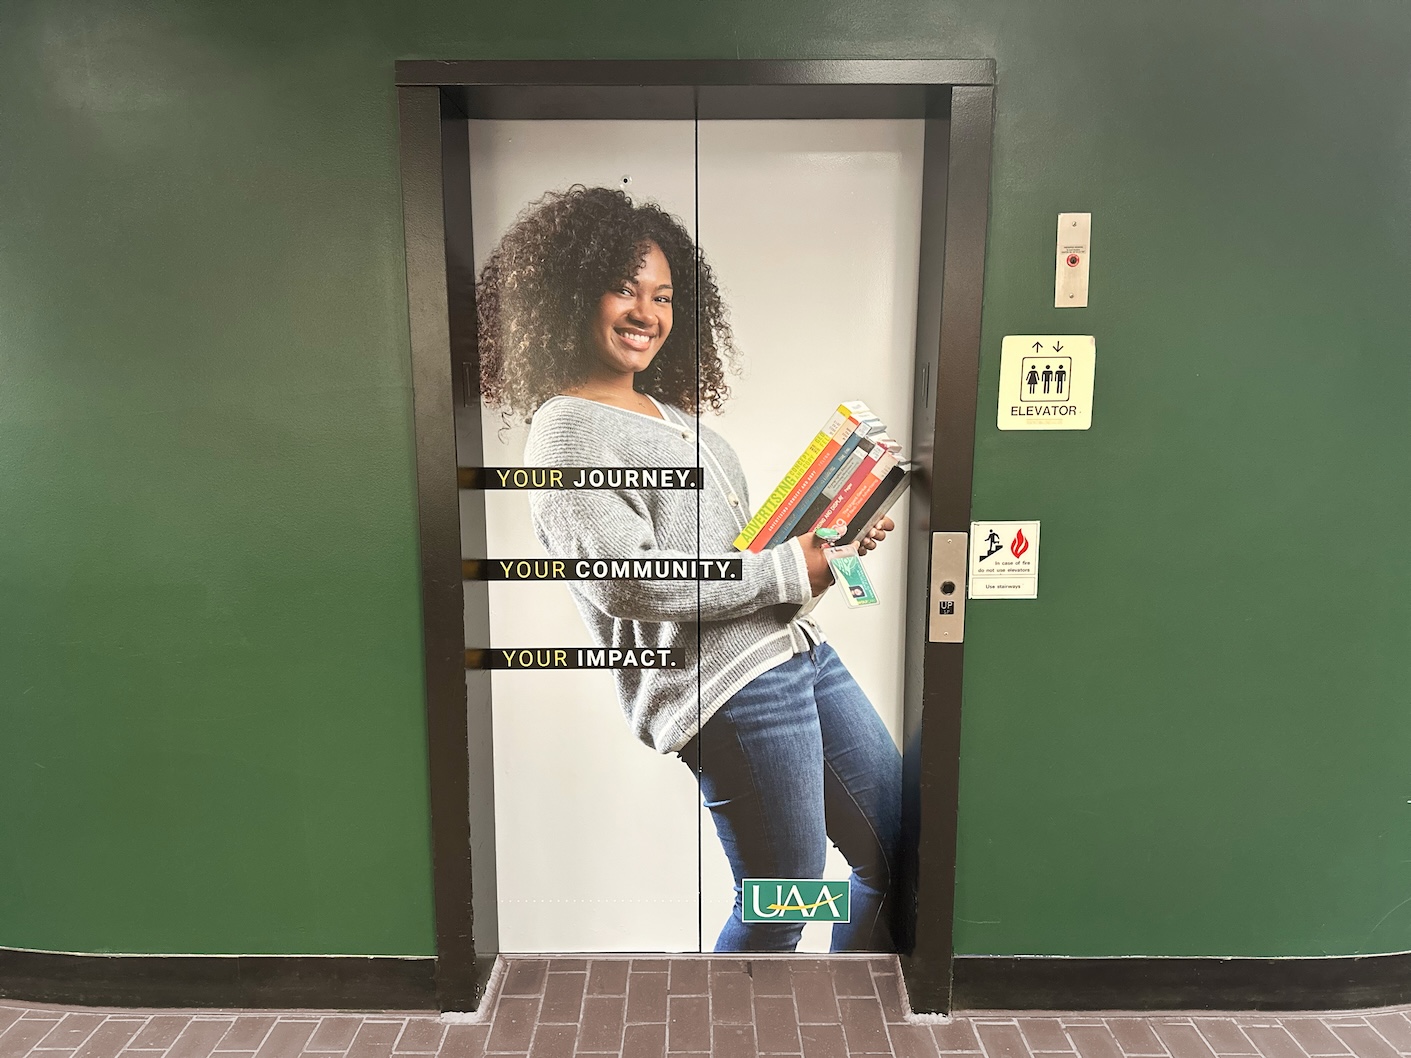 This is an image of an elevator large format graphic. The elevator is located on UAA Campus. The image is of a UAA student, she is holding a stack of books and leaning back. She is smiling and appears happy. She has a UAA ID hanging off the stack of books.